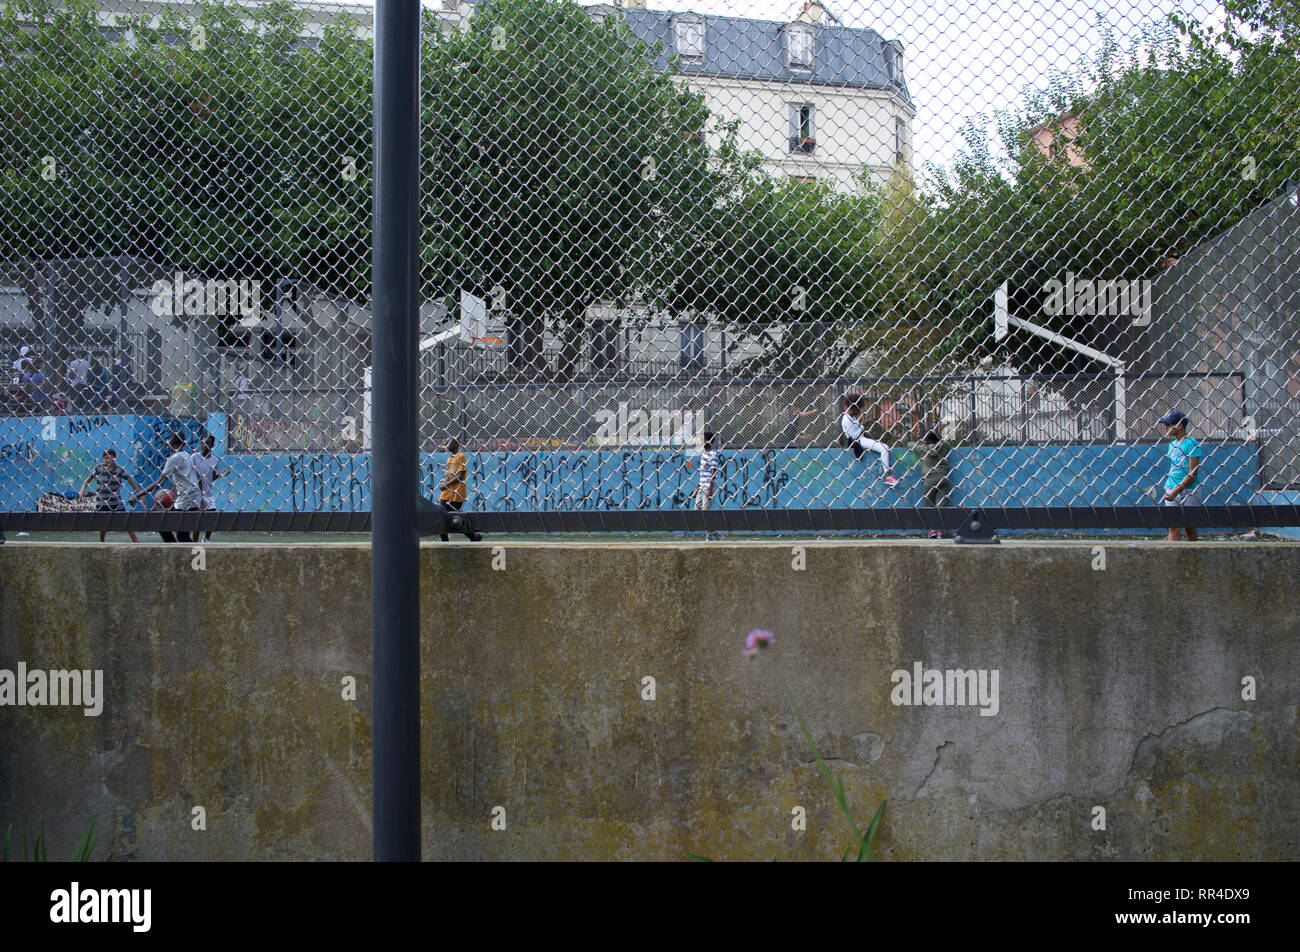 Children and teenagers play and hang-out in fenced football pitch, Square Léon, Rue des Gardes, Goutte d'Or, 75018, Paris, France Stock Photo